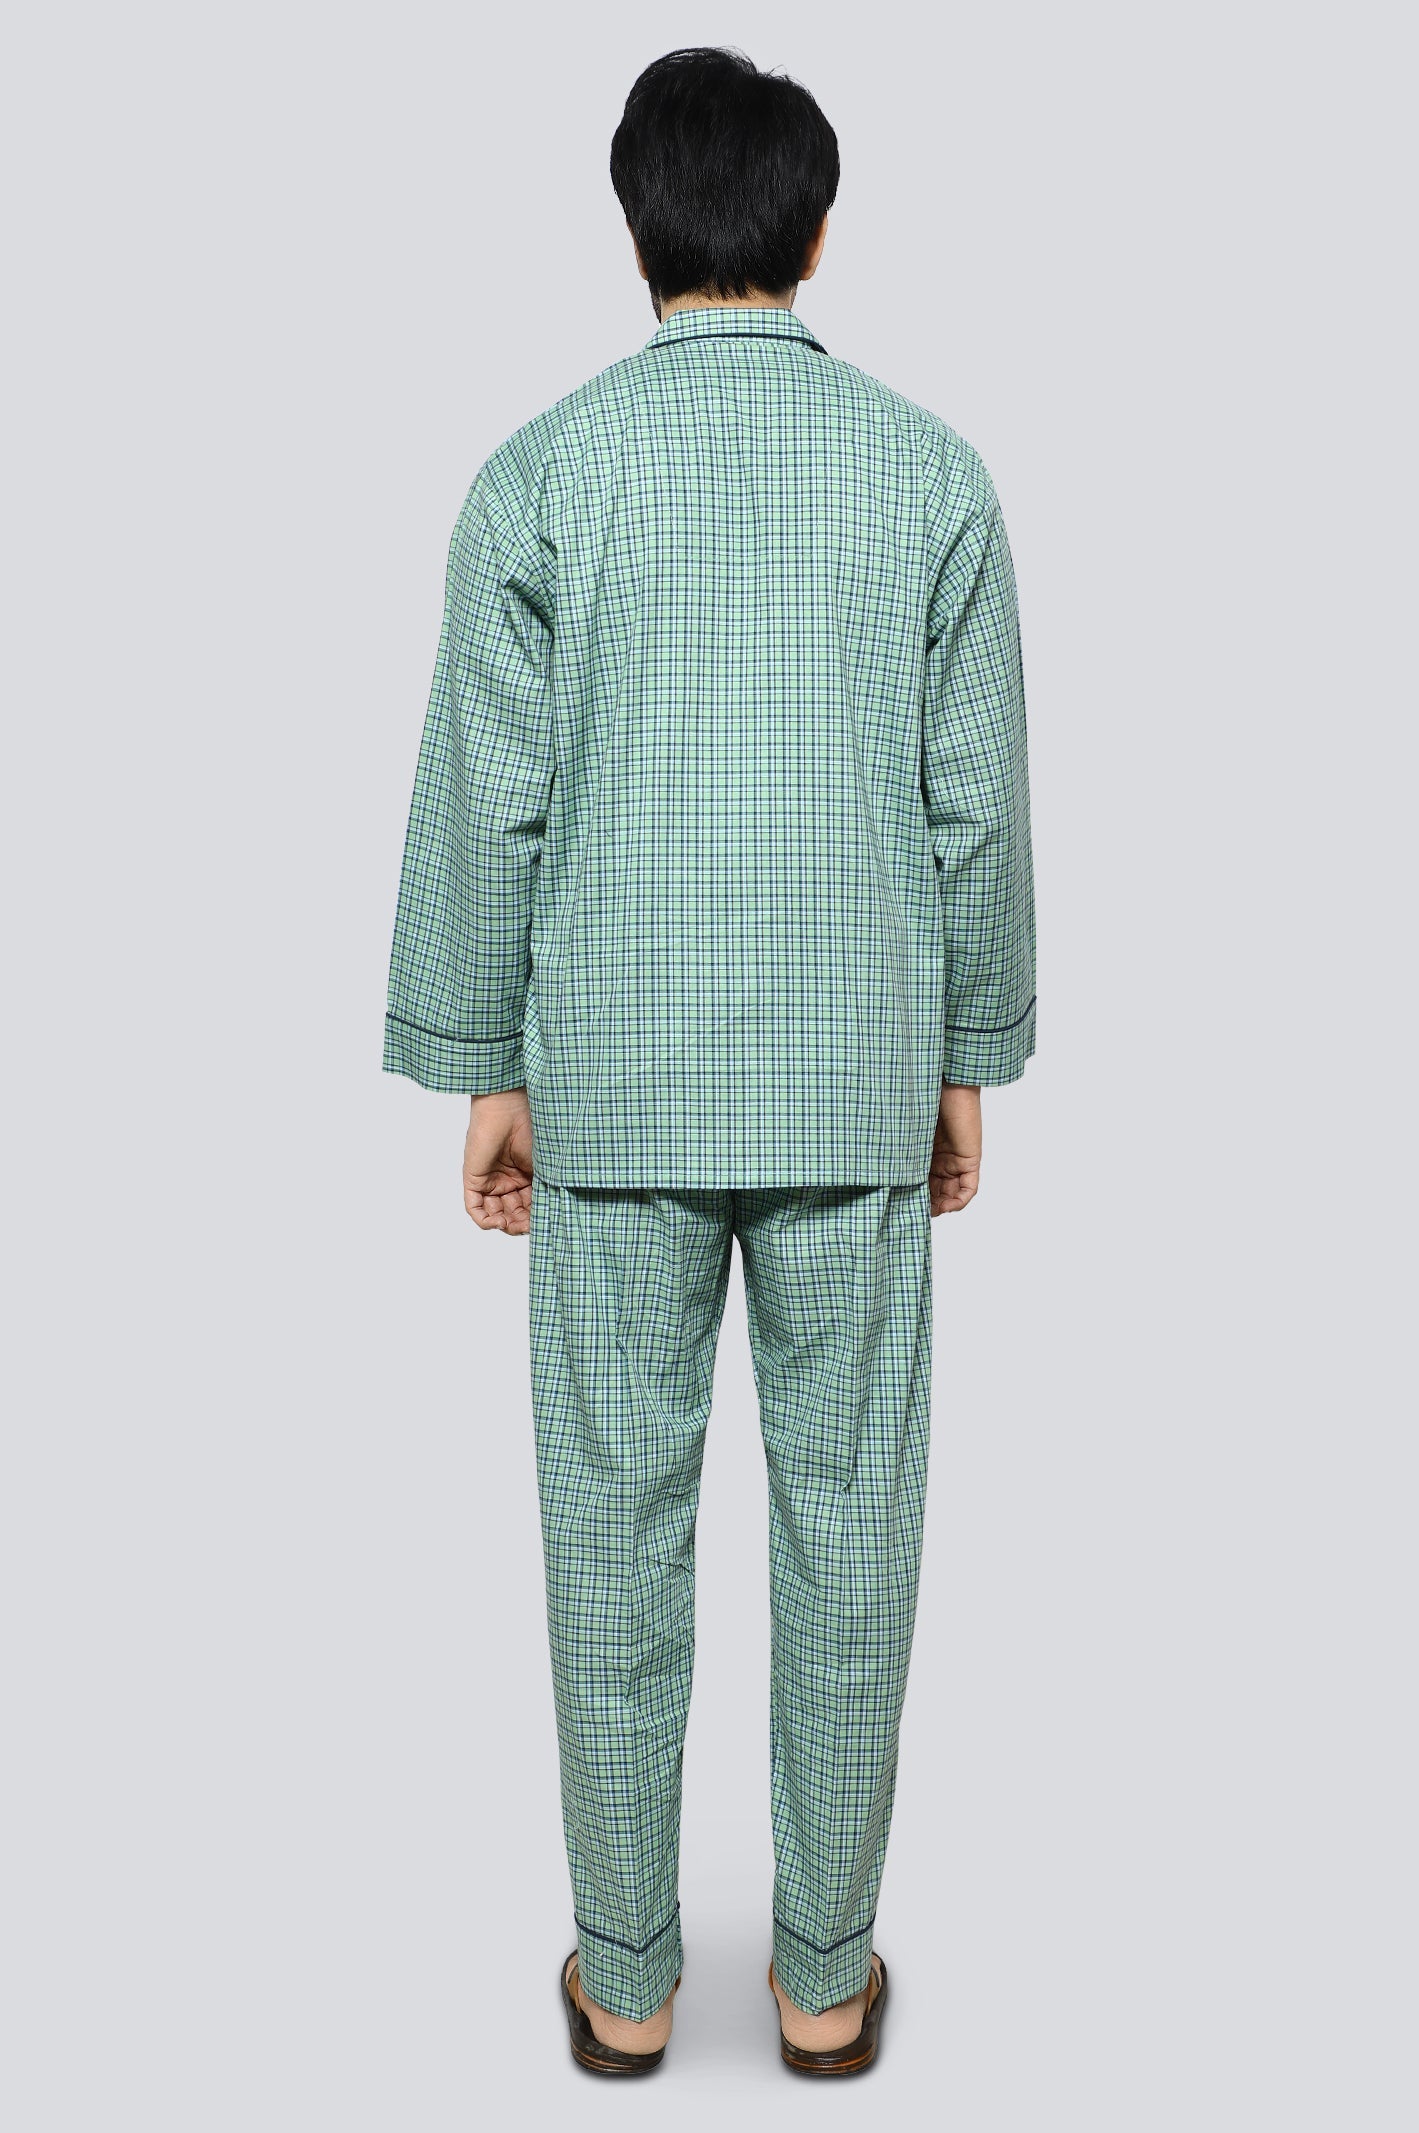 Diner's Night Suit for Men SKU: FNS020-GREEN - Diners